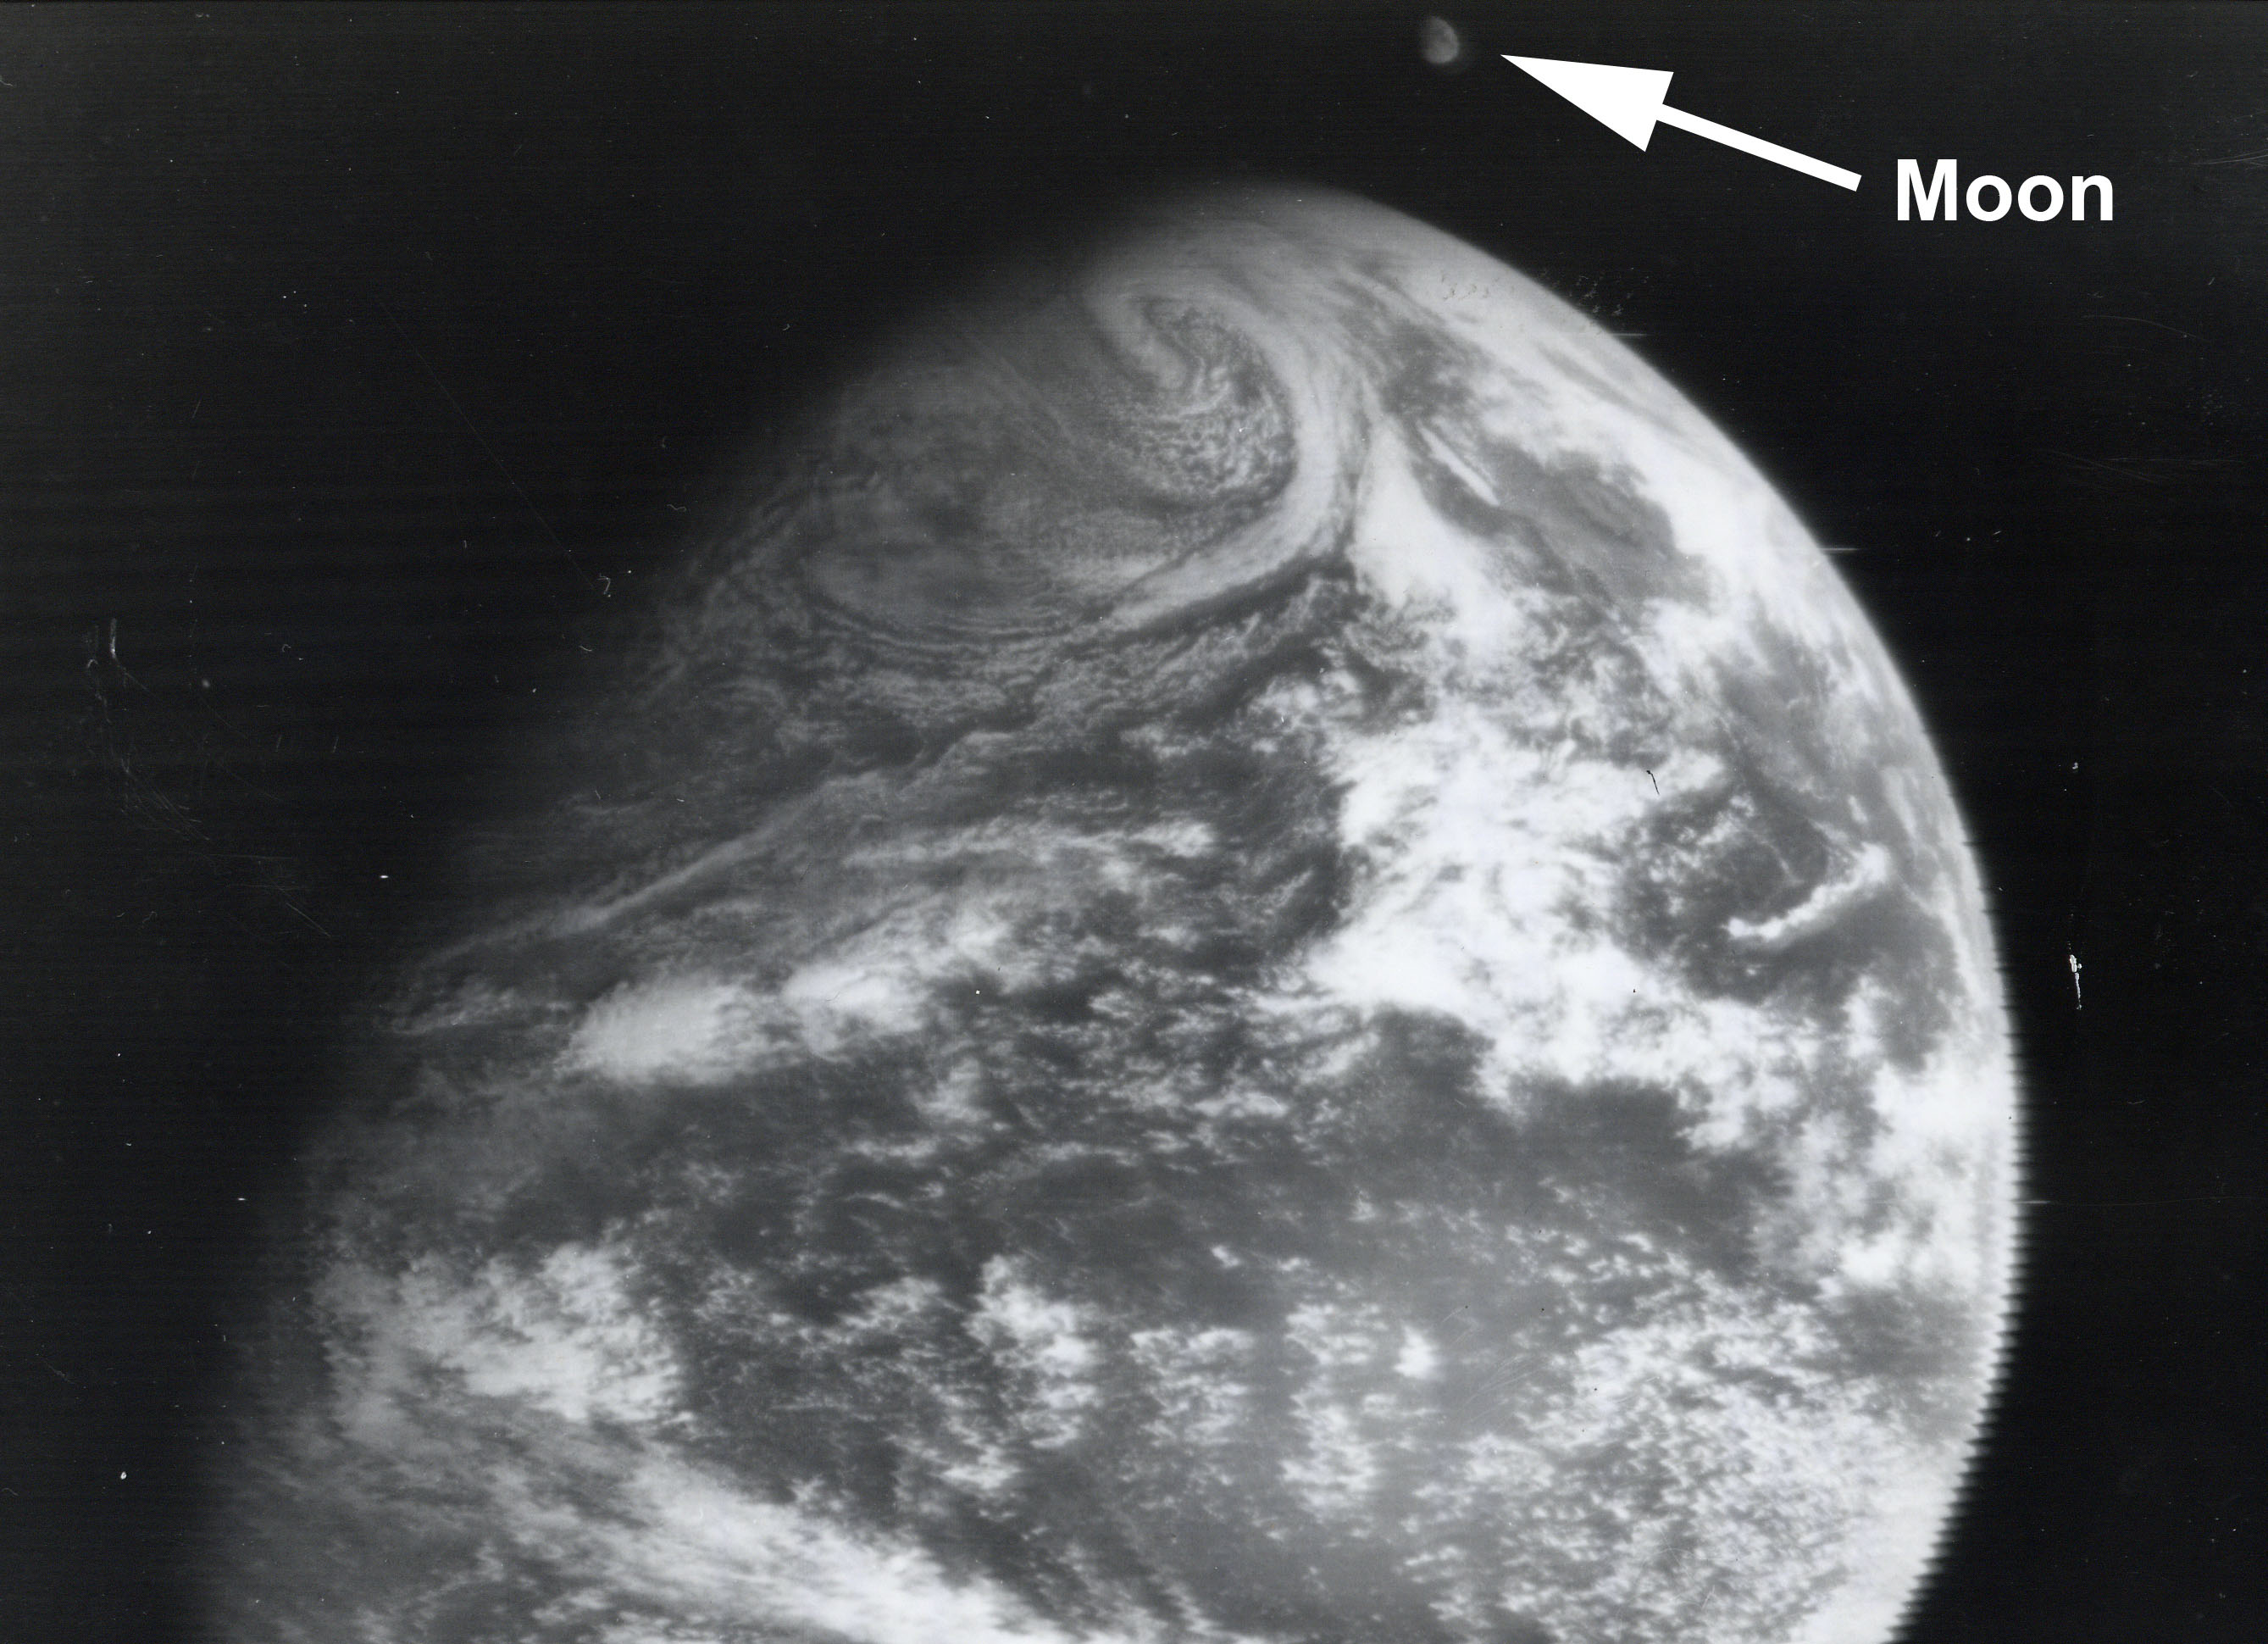 Explorer 1 Image Galleries Images Of Earth From Space